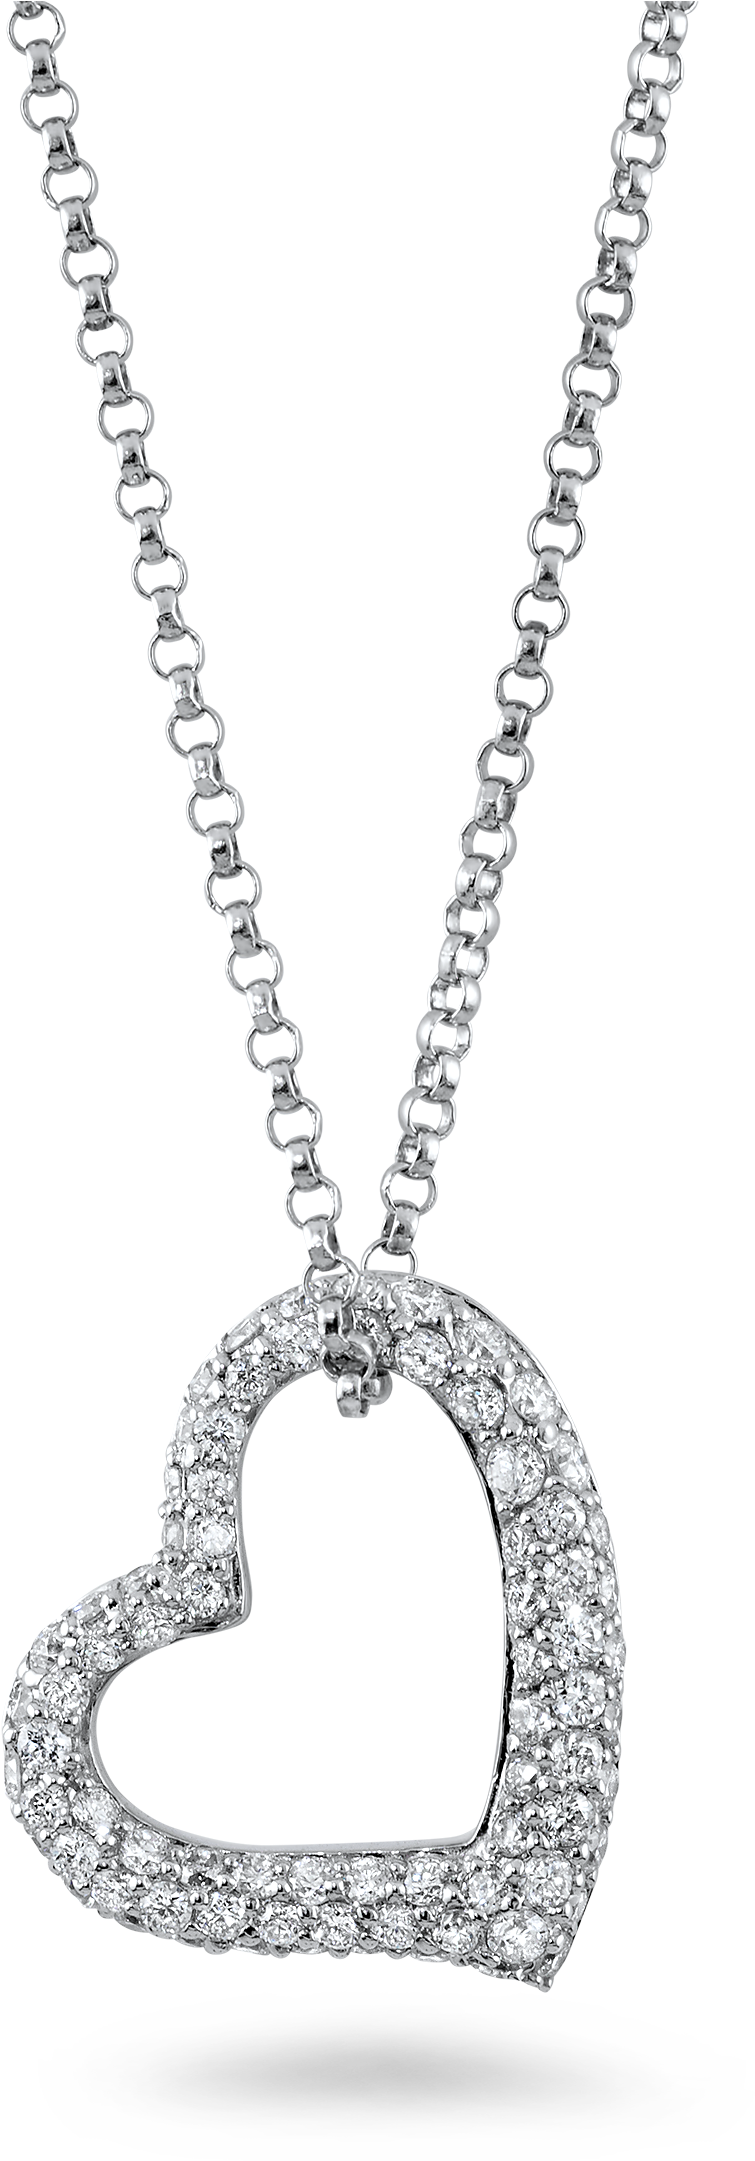 A Silver Necklace With A Diamond Pendant